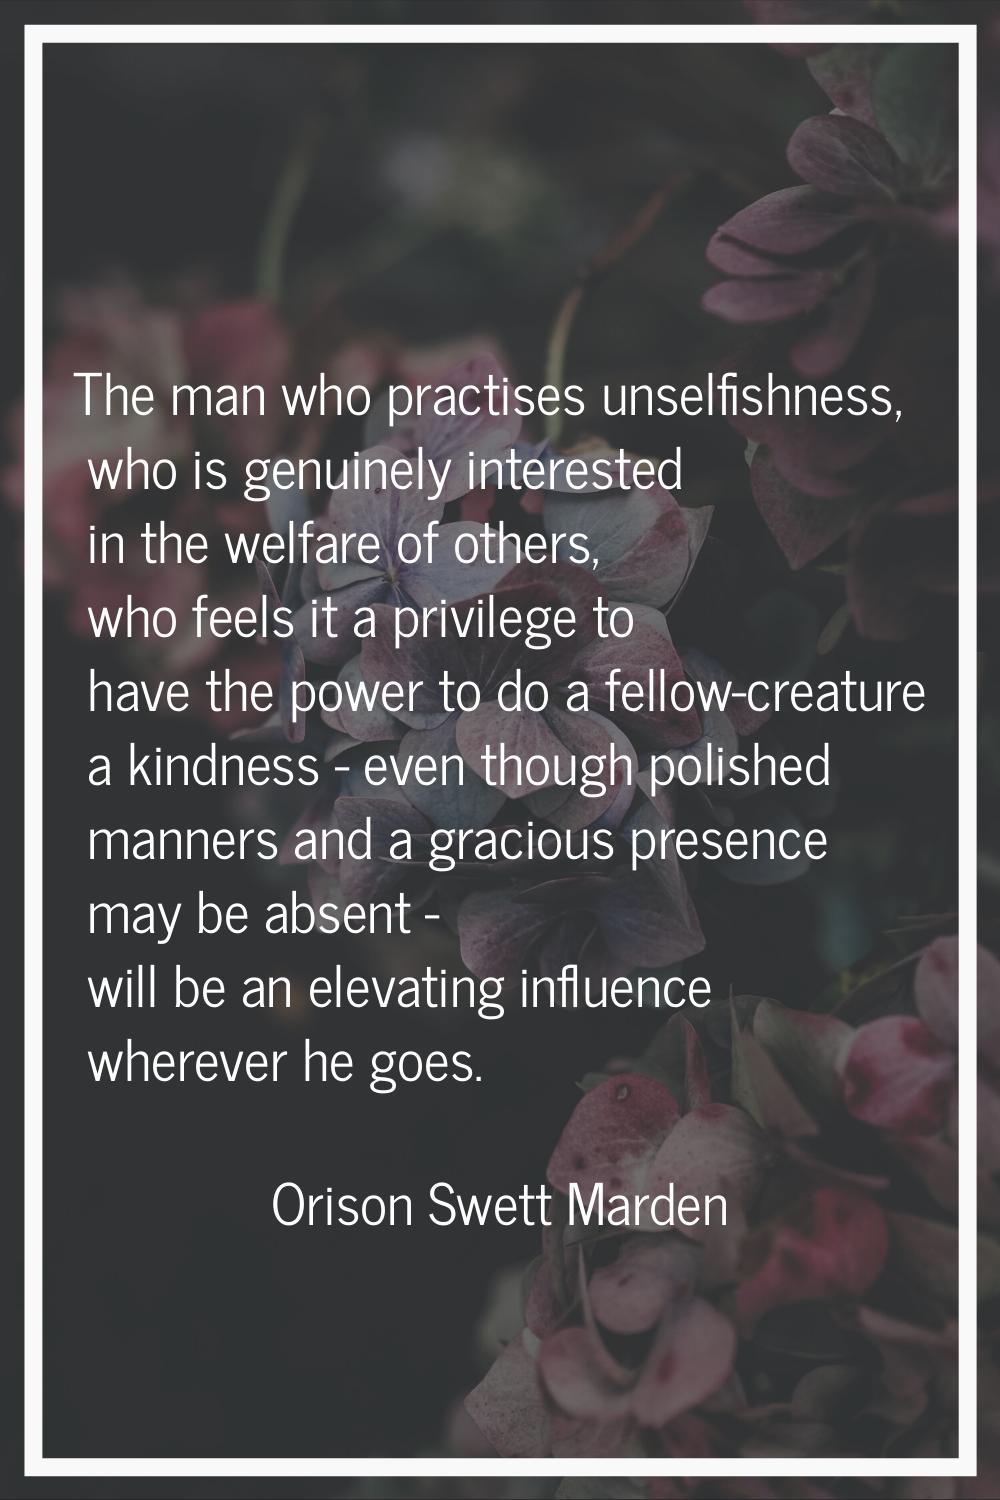 The man who practises unselfishness, who is genuinely interested in the welfare of others, who feel